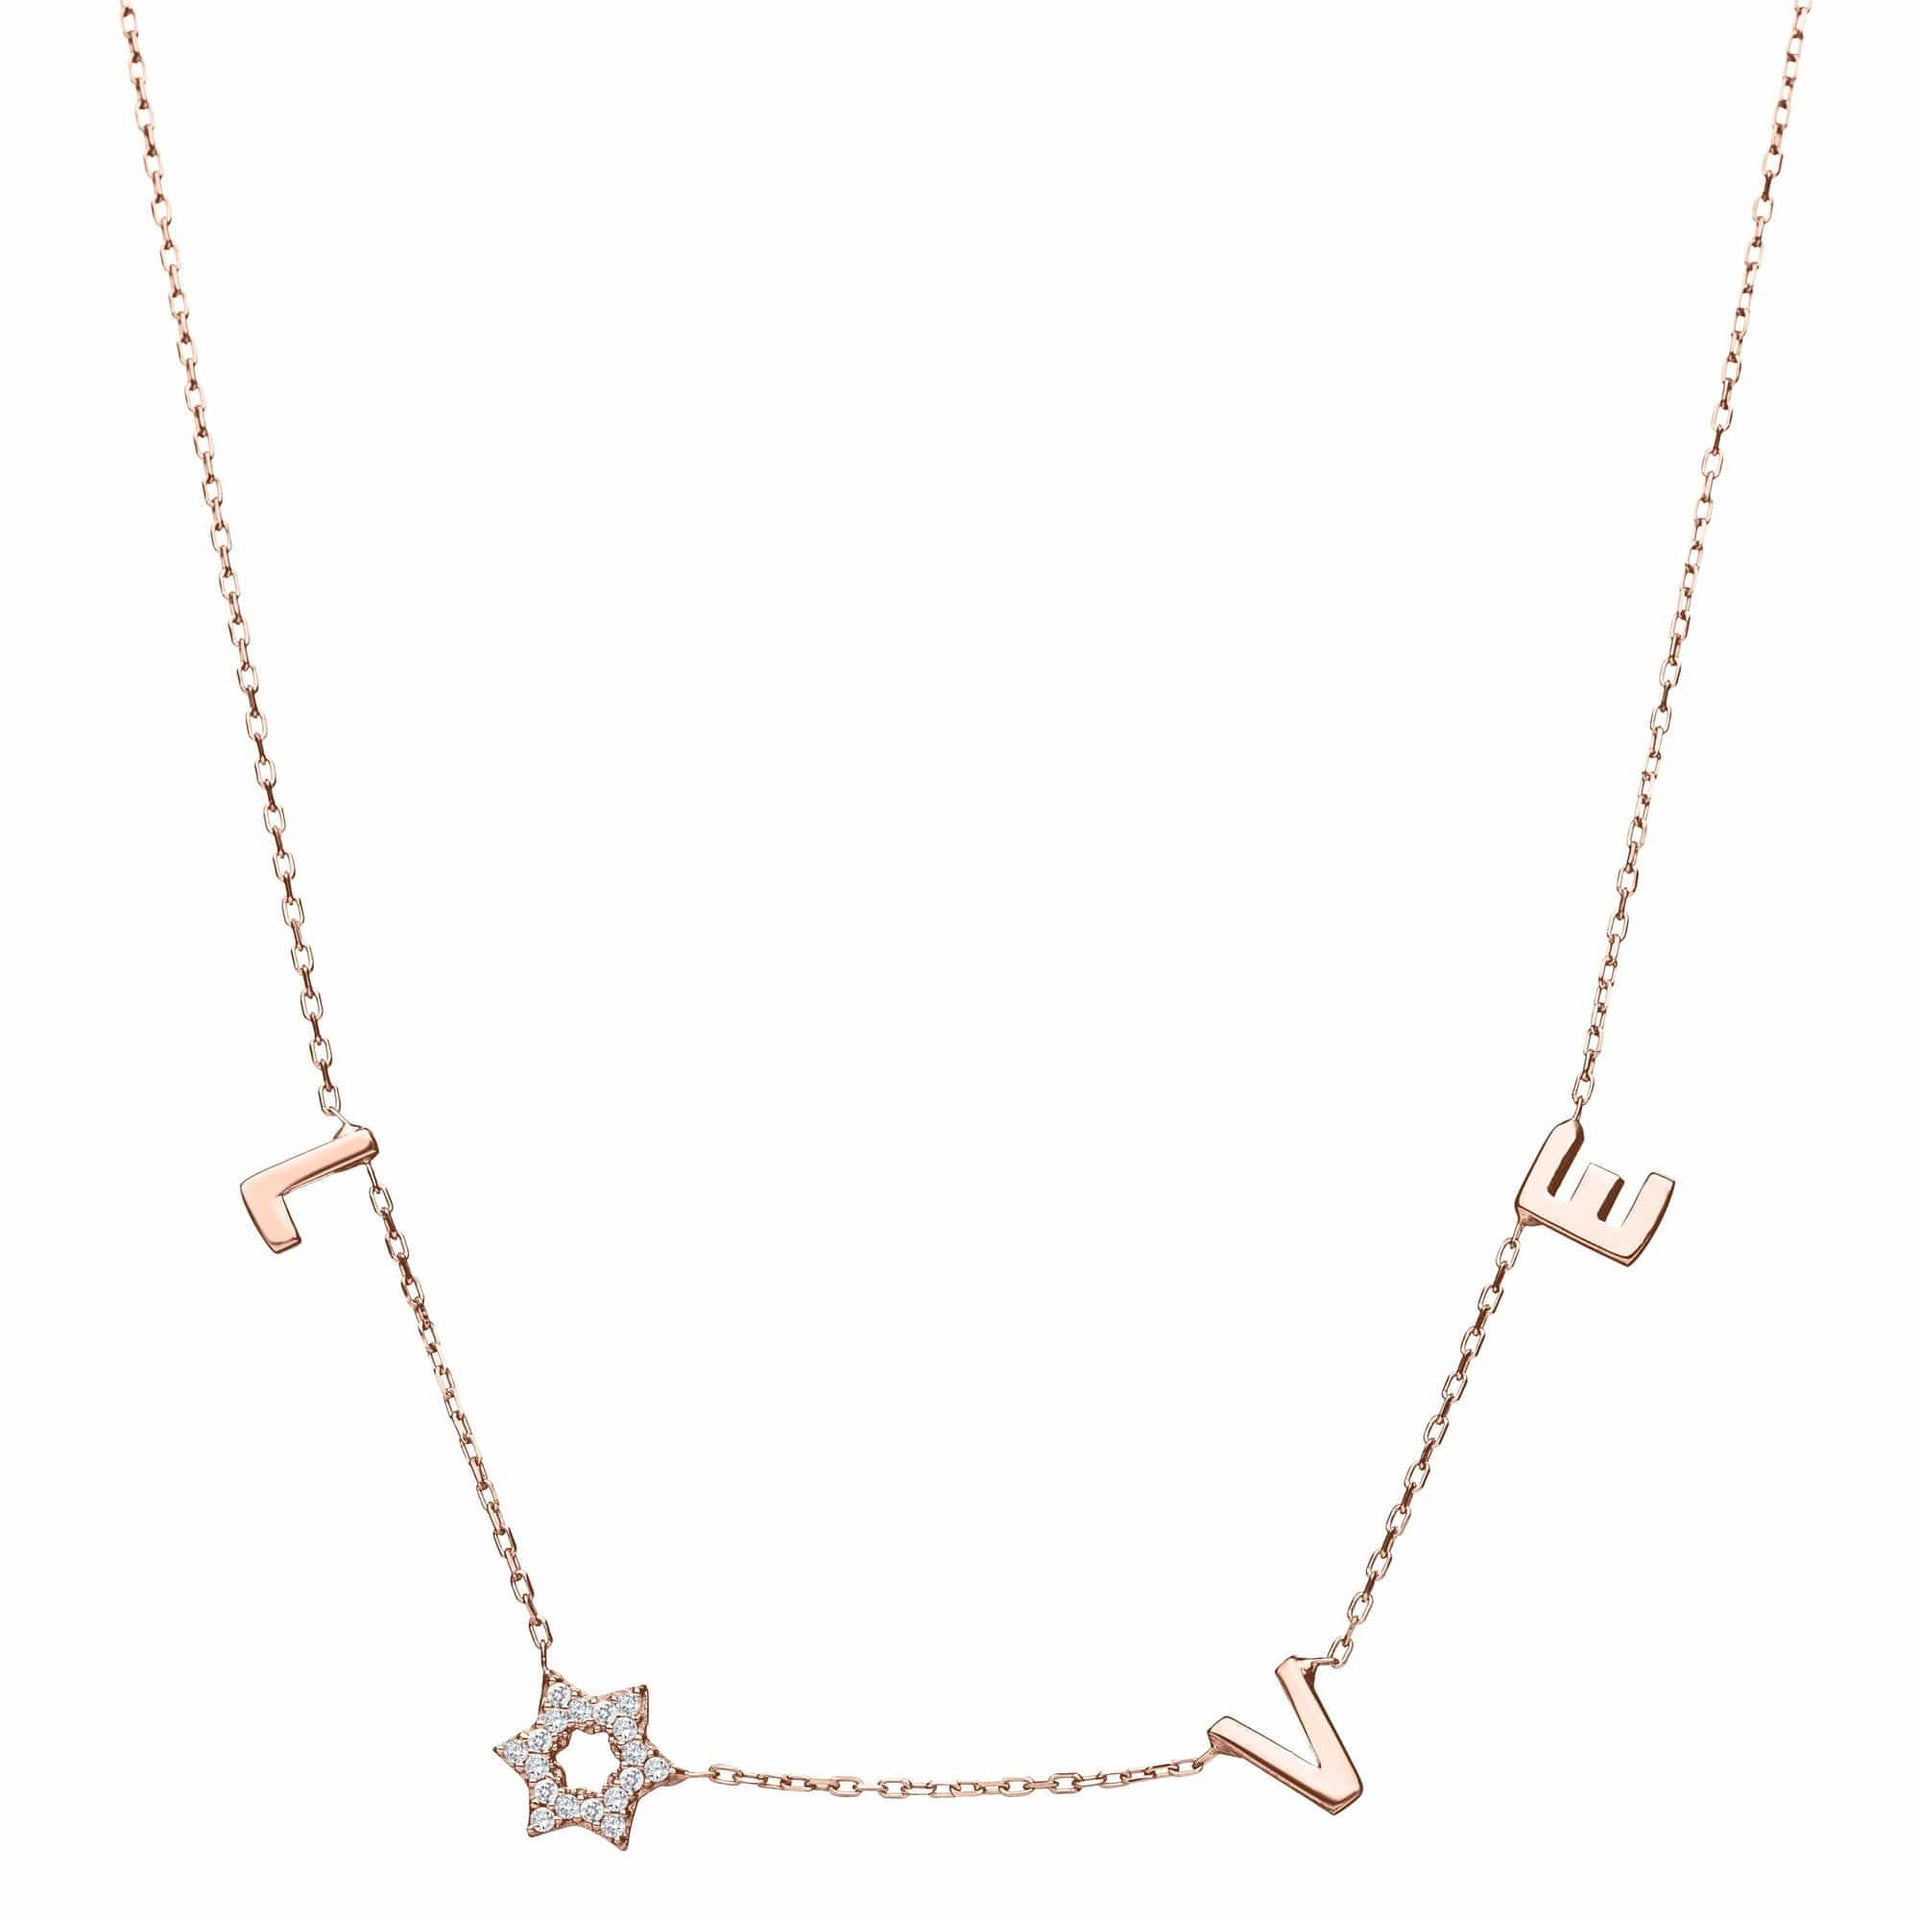 Alef Bet Necklaces Rose Gold Love Necklace in 14k Gold with Diamond Star of David - White Gold, Gold or Rose Gold